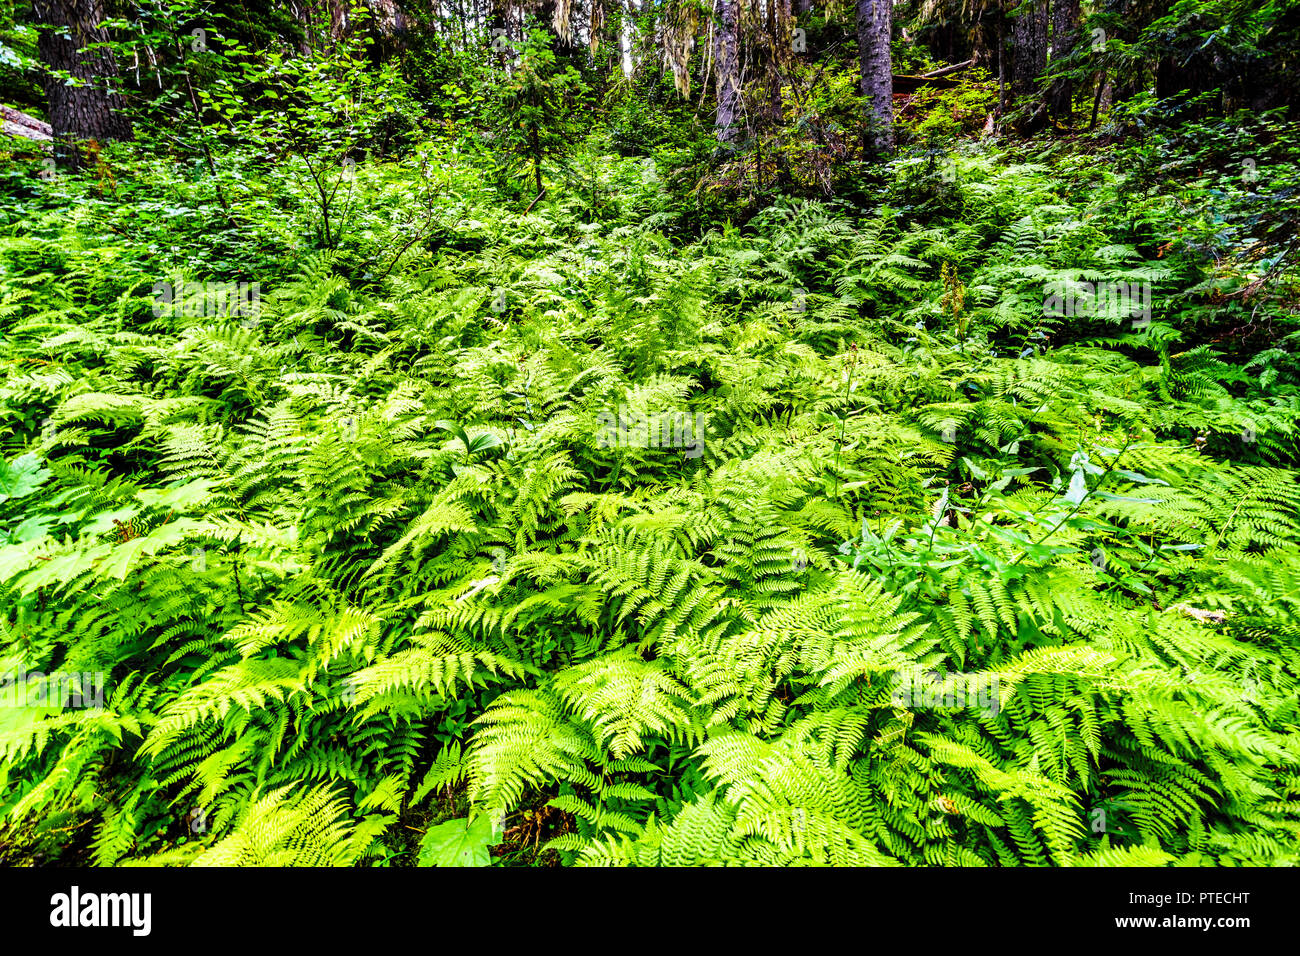 Large Group of Western Sword Ferns along a hiking trail to Falls Lake near the Coquihalla Summit in British Columbia, Canada Stock Photo